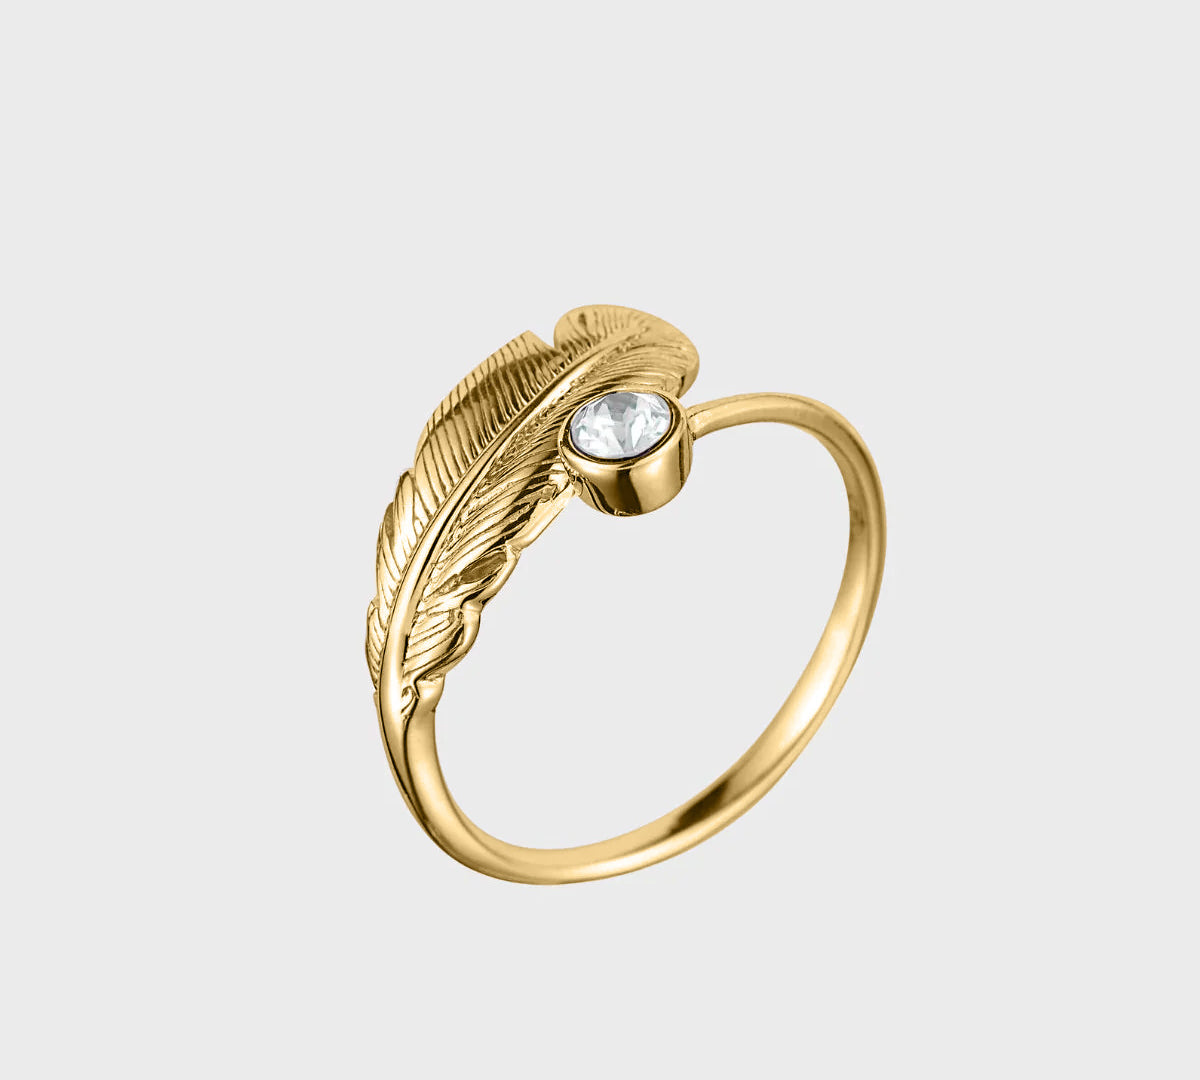 Adjustable Crystal Feather Birthstone Ring - April